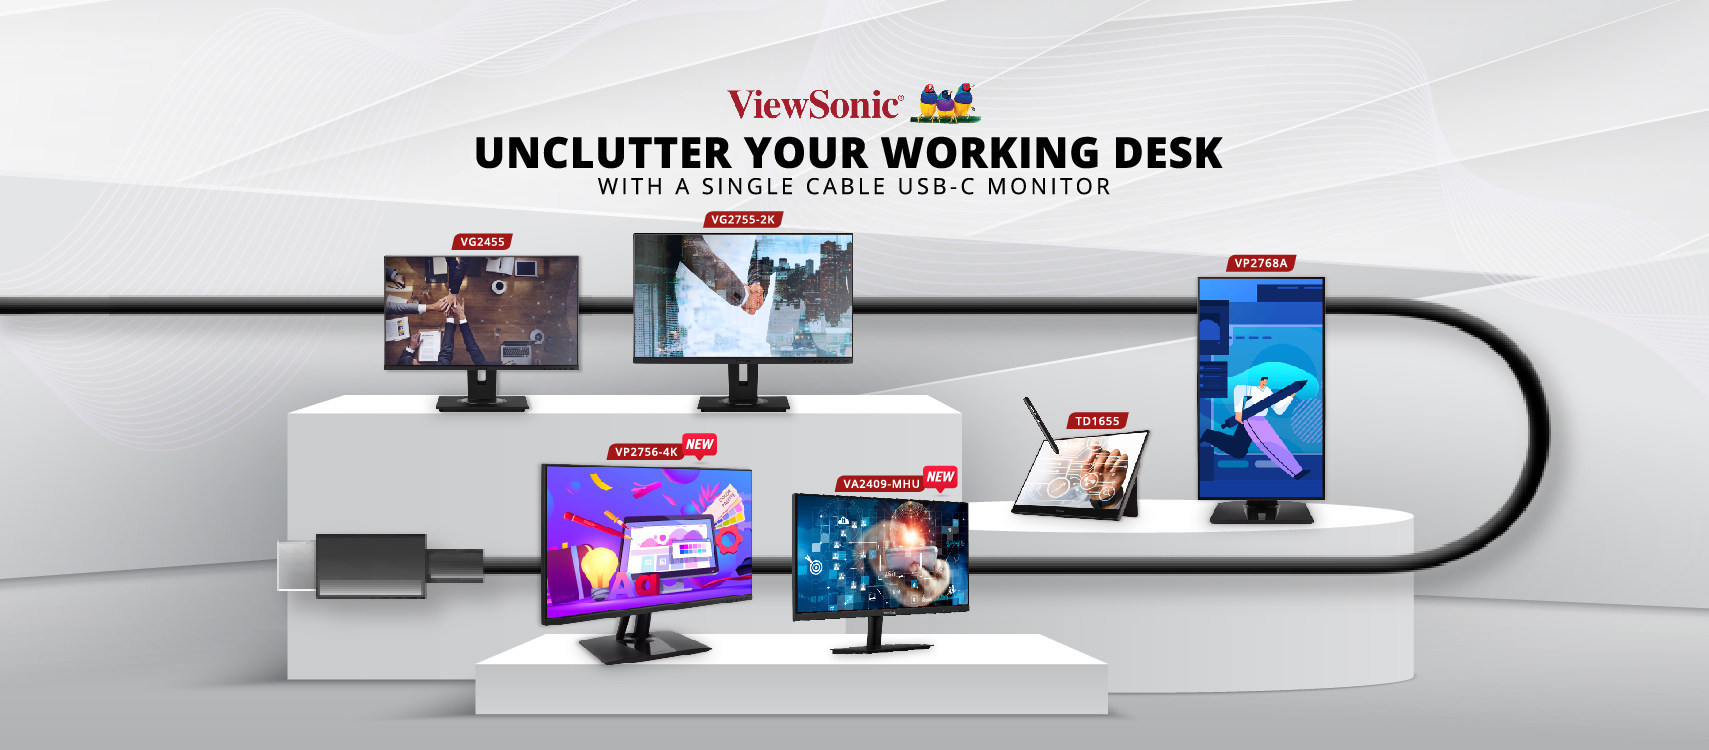 ViewSonic’s USB-C Monitors Simplifies Connectivity with its One Cable Solution